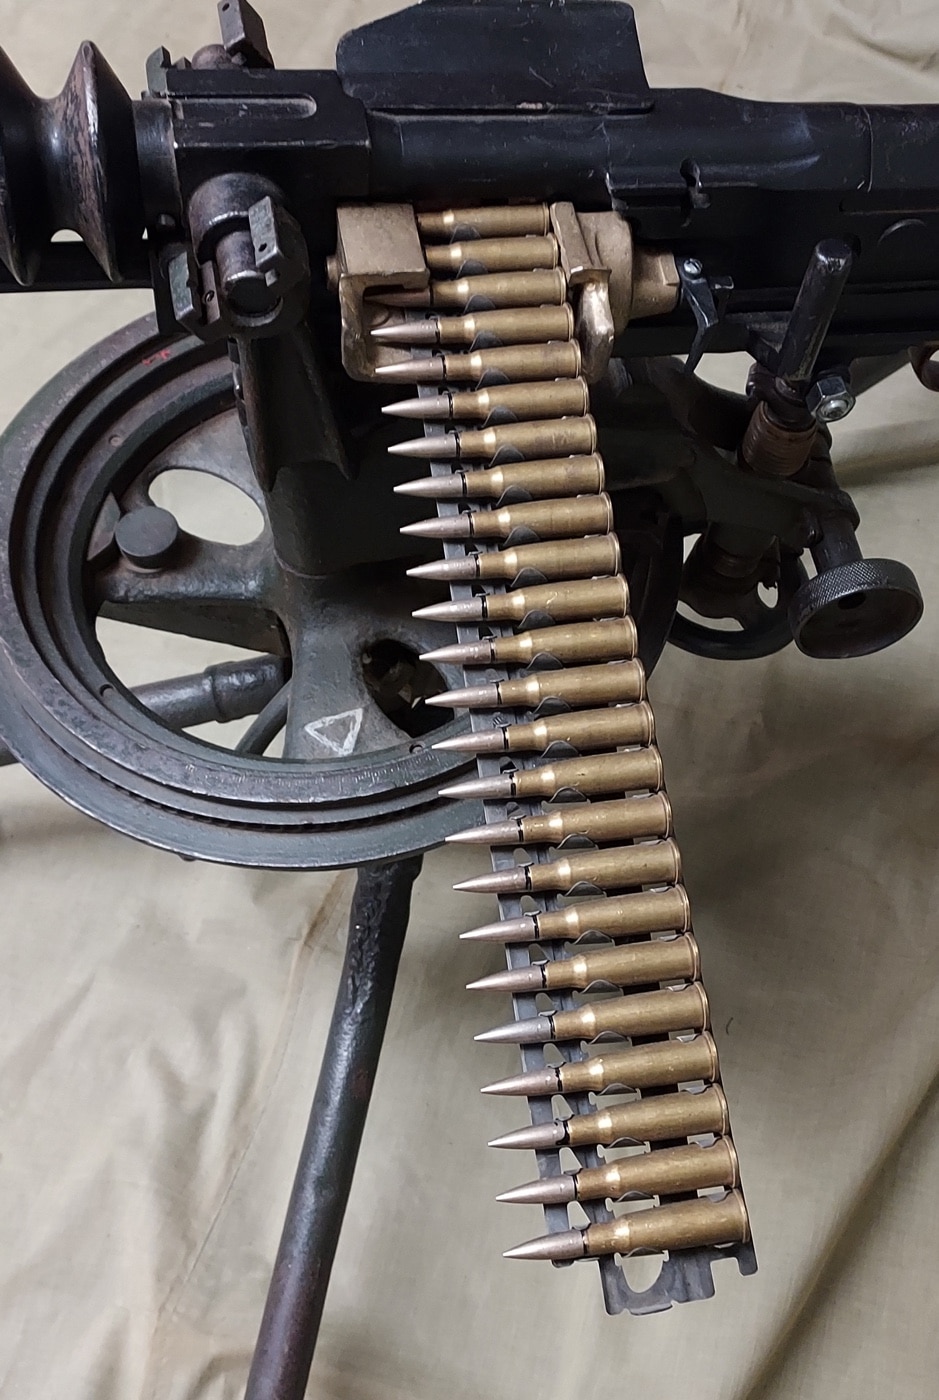 This image shows how the Hotchkiss metal feed strip loads ammunition into the gun. The photo shows how the Lebel cartridges are loaded into the strip and then fed into the weapon.